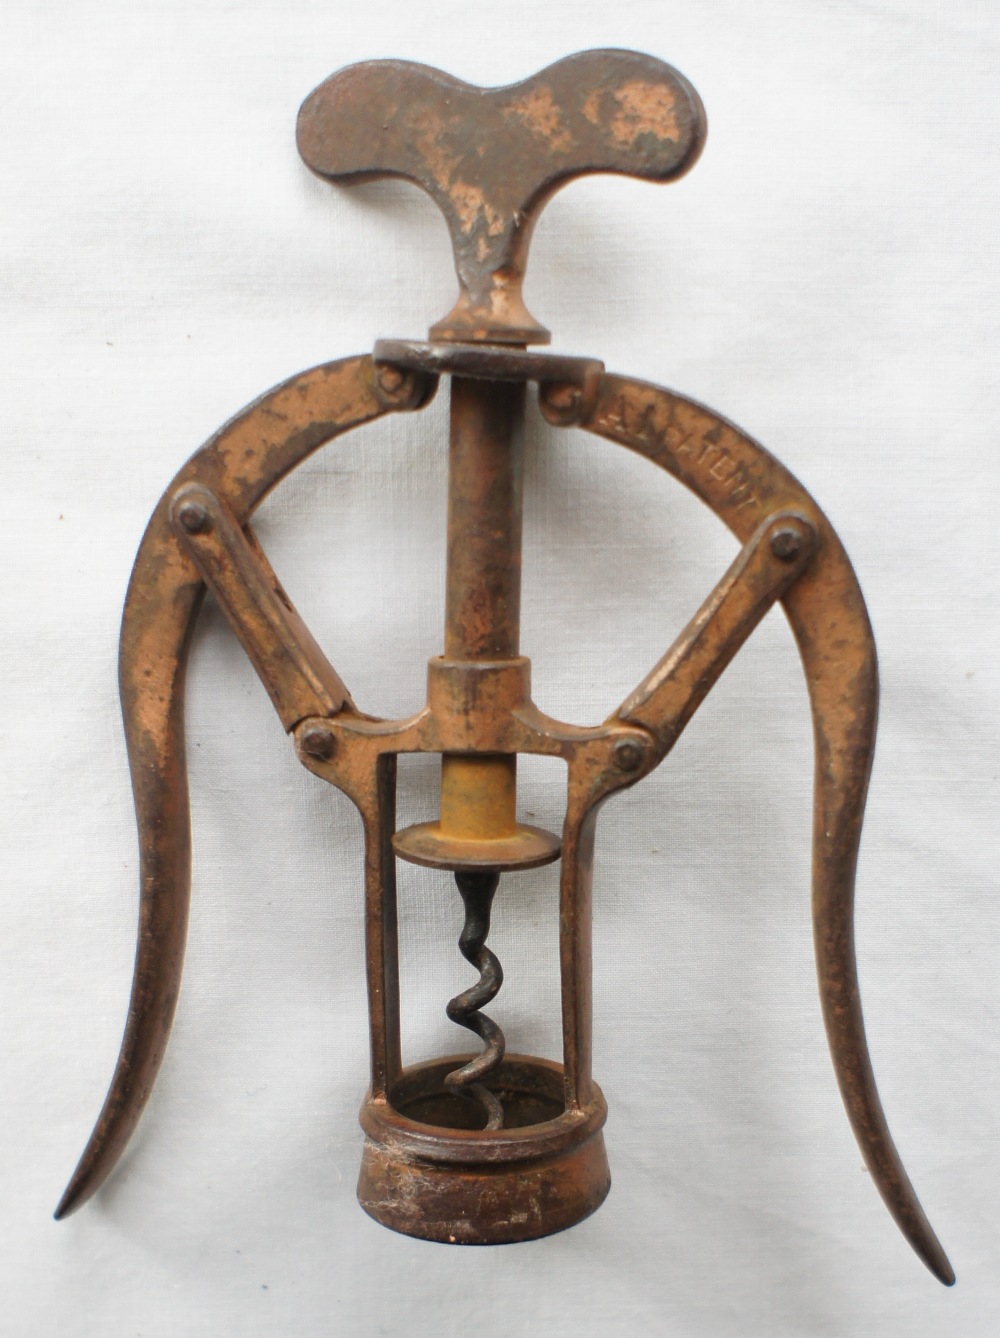 A double lever corkscrew by James Heeley & Sons, marked PATENT 6006 - Image 4 of 4